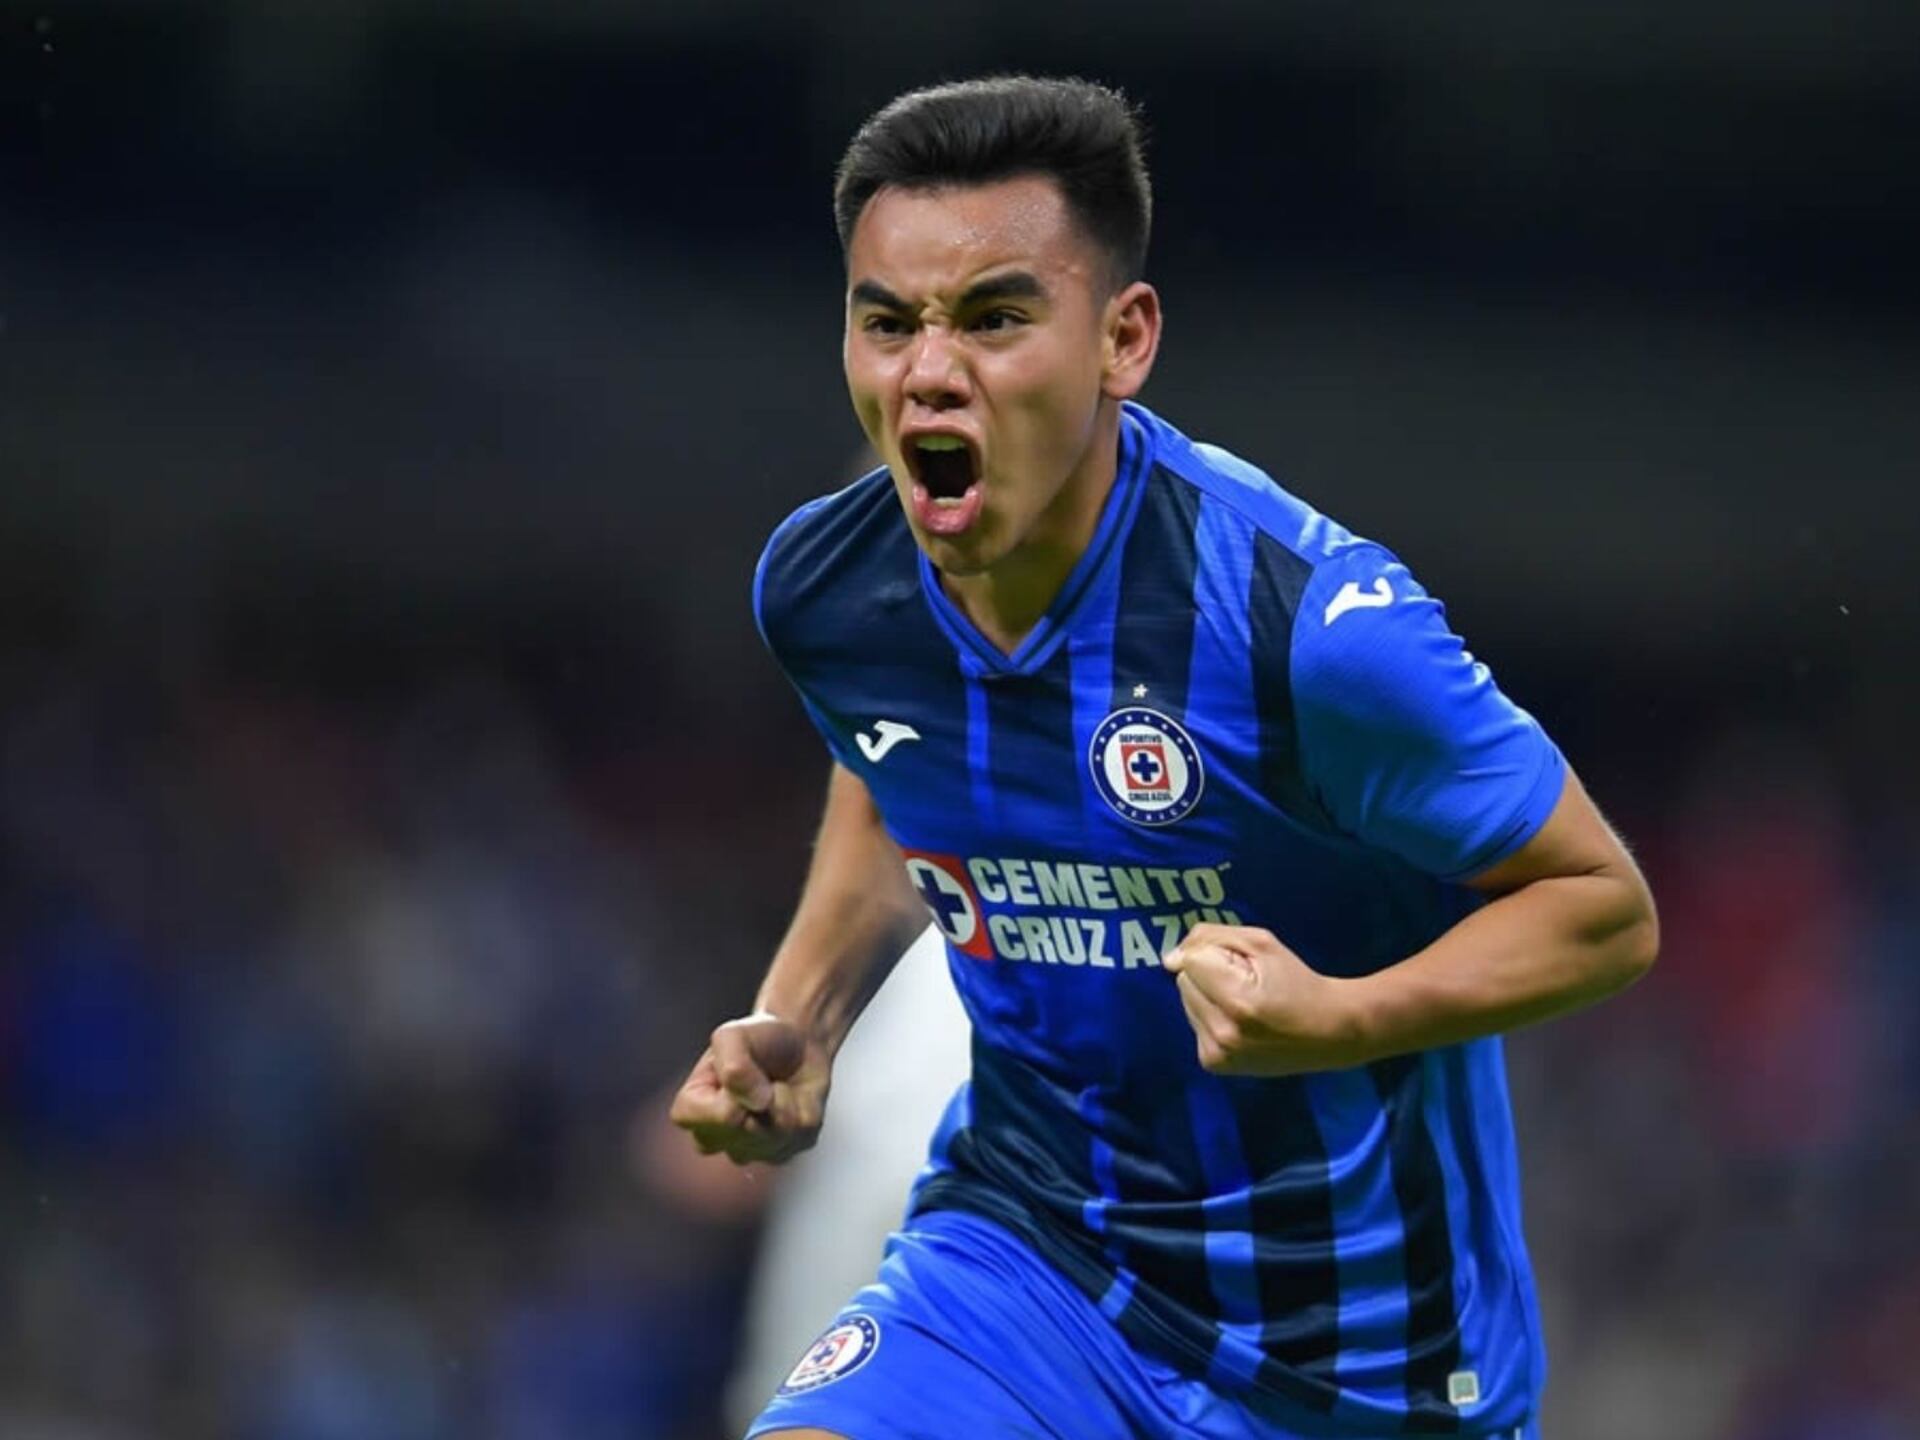 Charly Rodríguez is breaking records with Cruz Azul after only two games